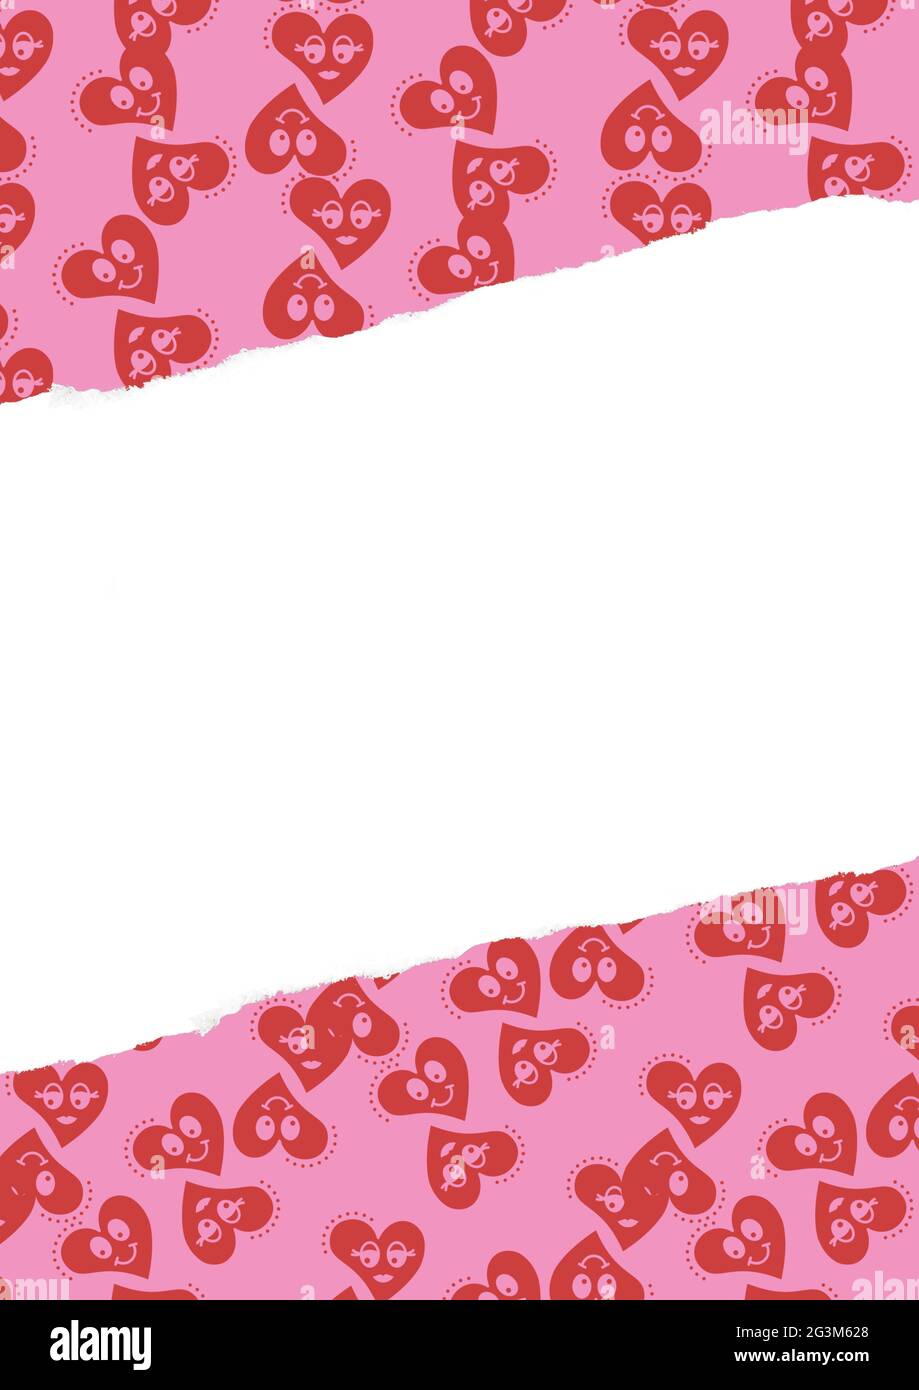 Composition of red smiling heart icons on pink with torn middle and copy space on white background Stock Photo